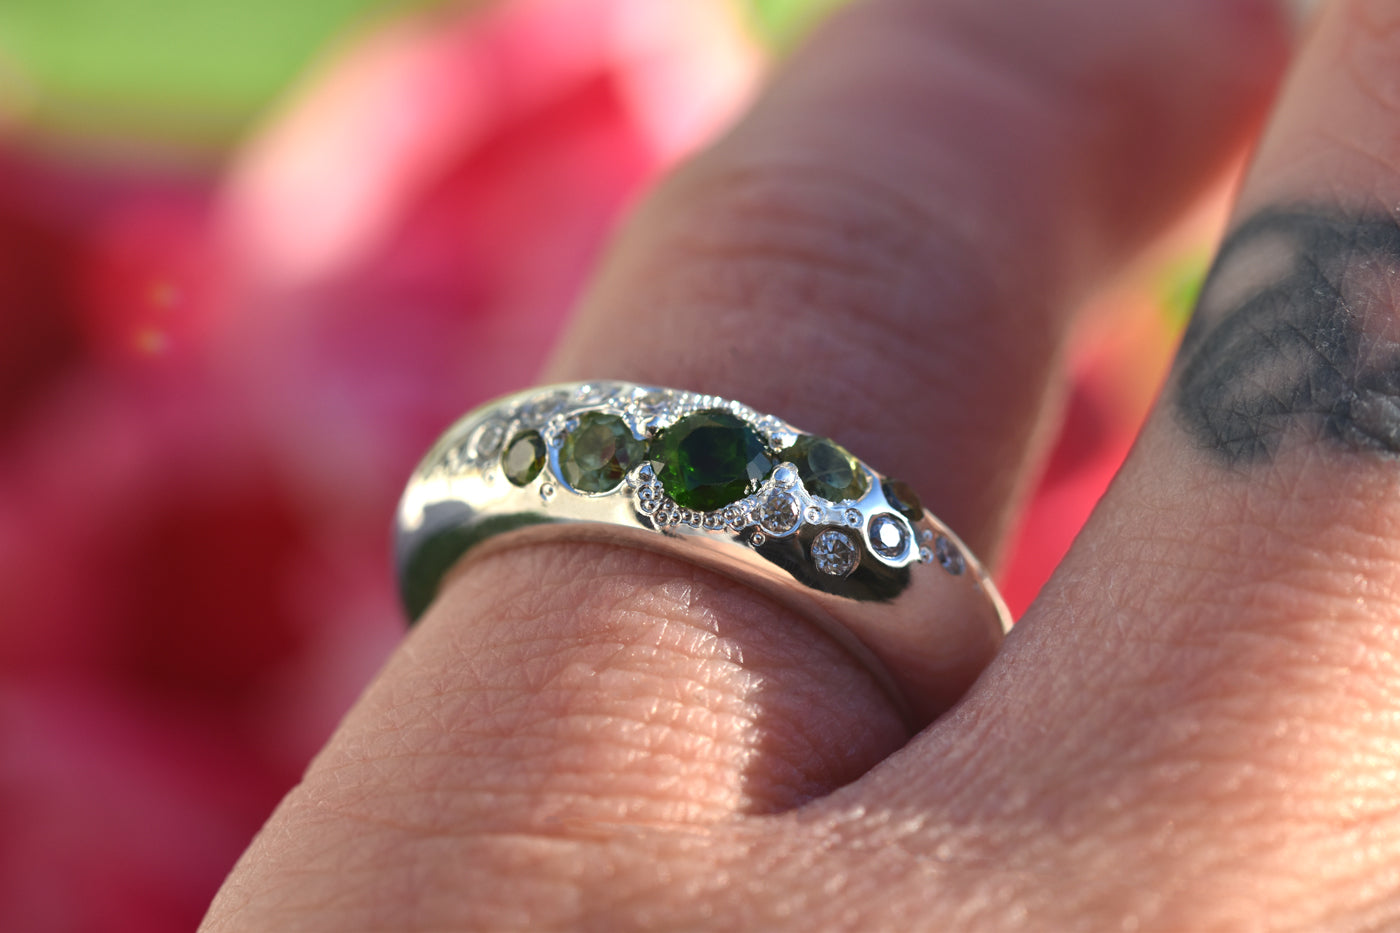 Rainforest Ring with Chrome Diopside, Peridot & Diamonds being Worn